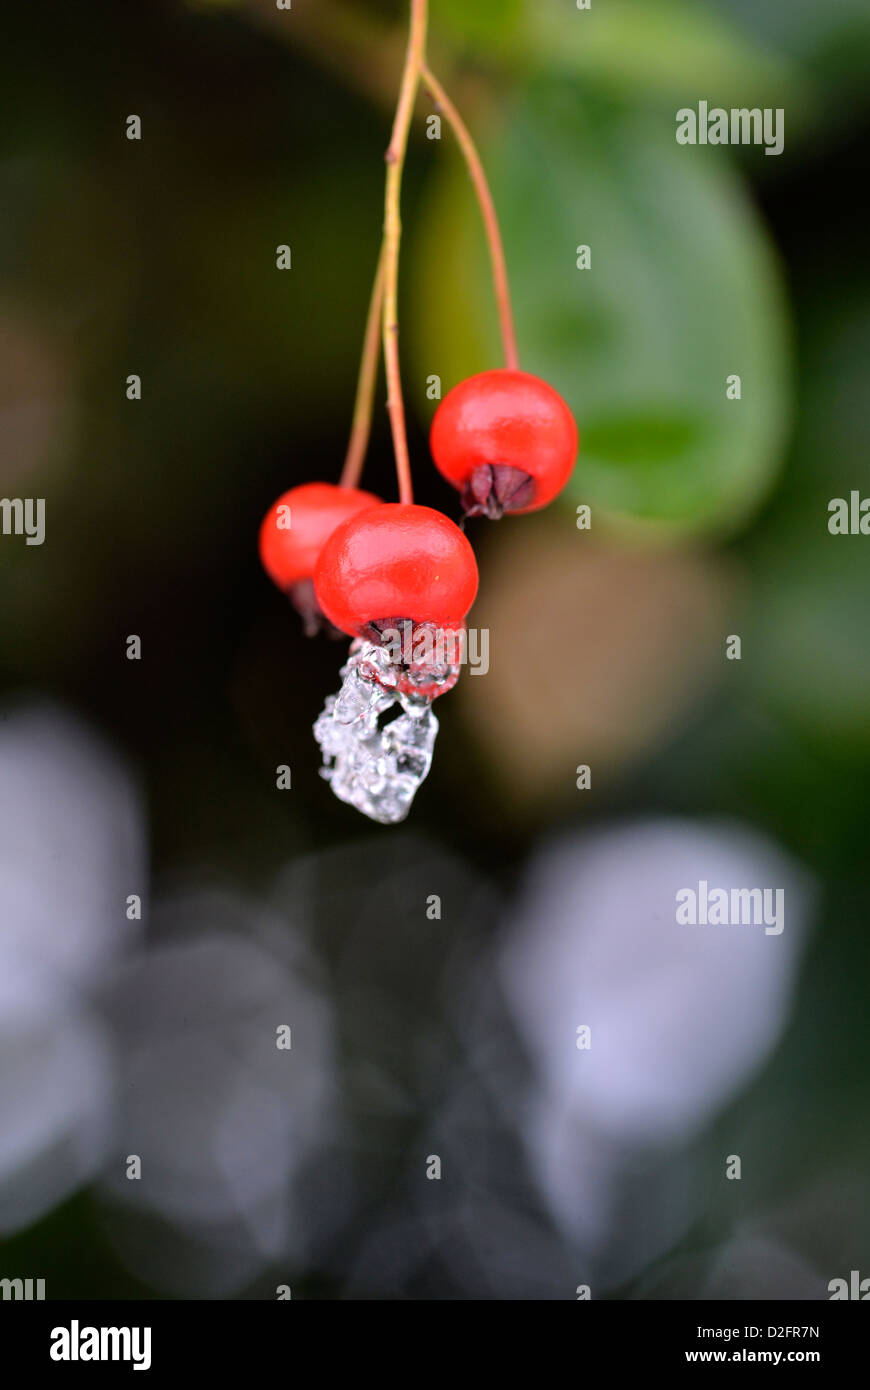 A close-up photograph of melting ice on red Cotoneaster berries. Stock Photo